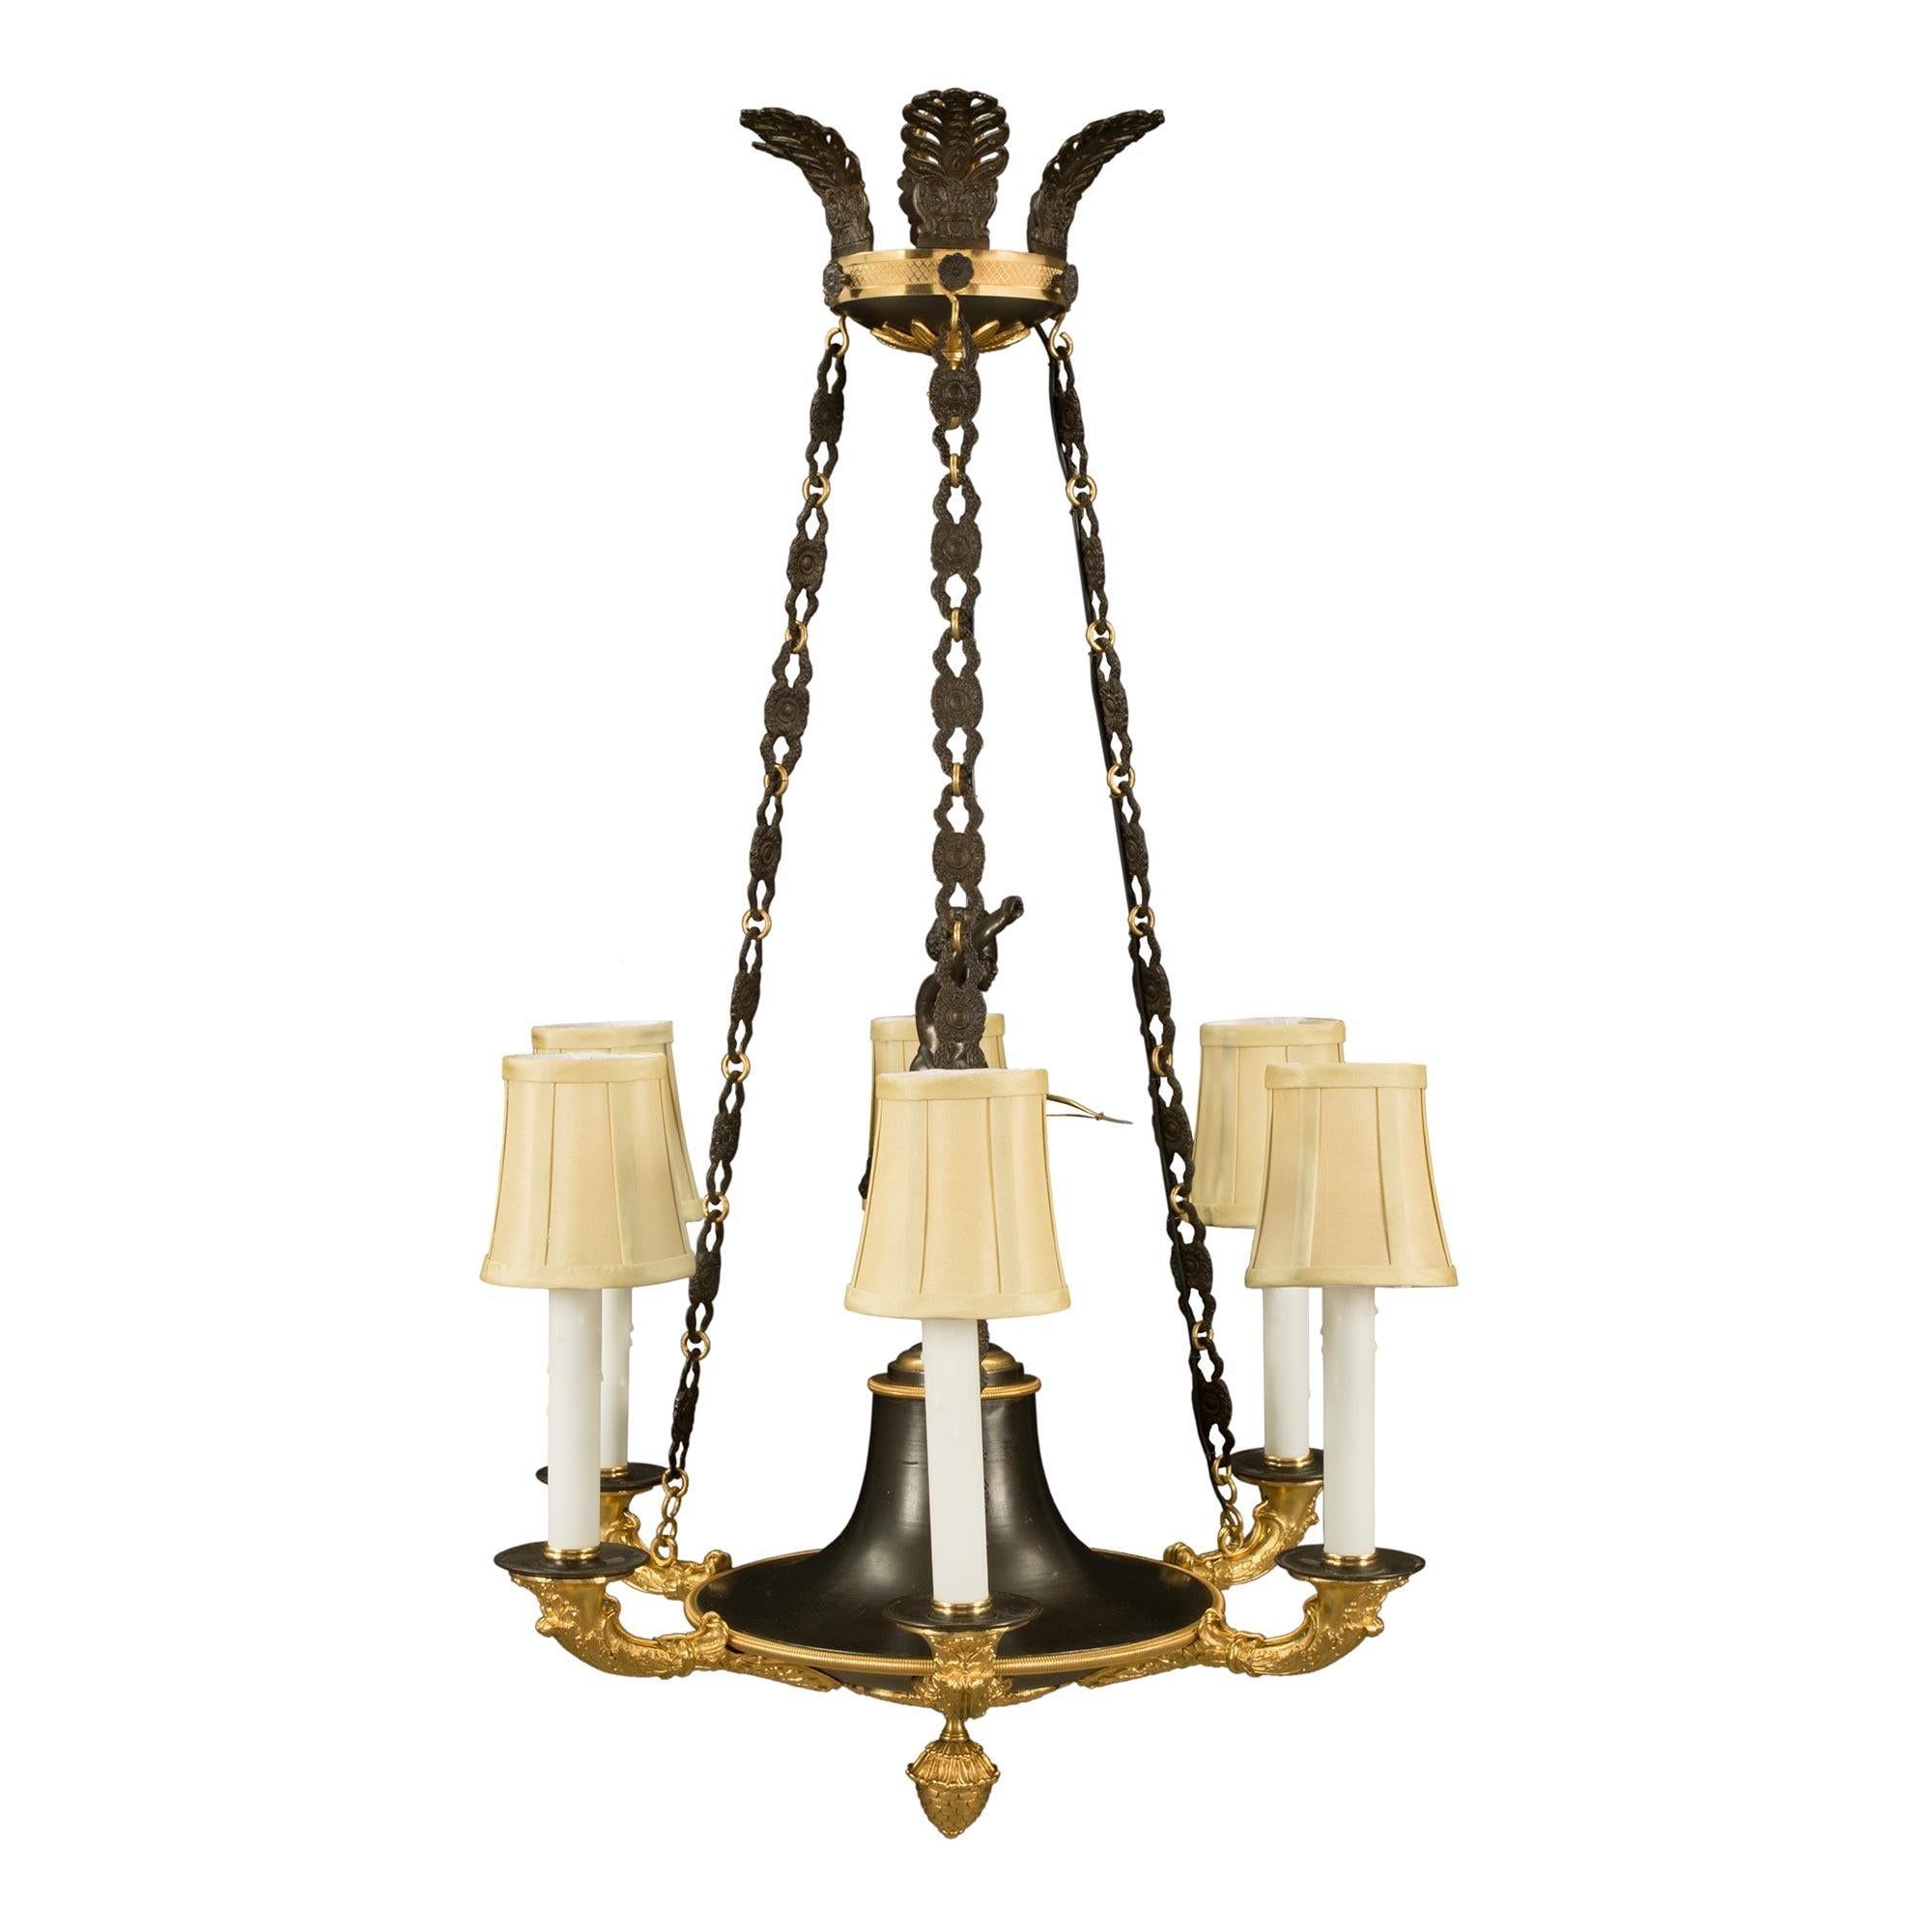 French 19th Century Neoclassical Style Bronze and Ormolu Chandelier In Good Condition For Sale In West Palm Beach, FL